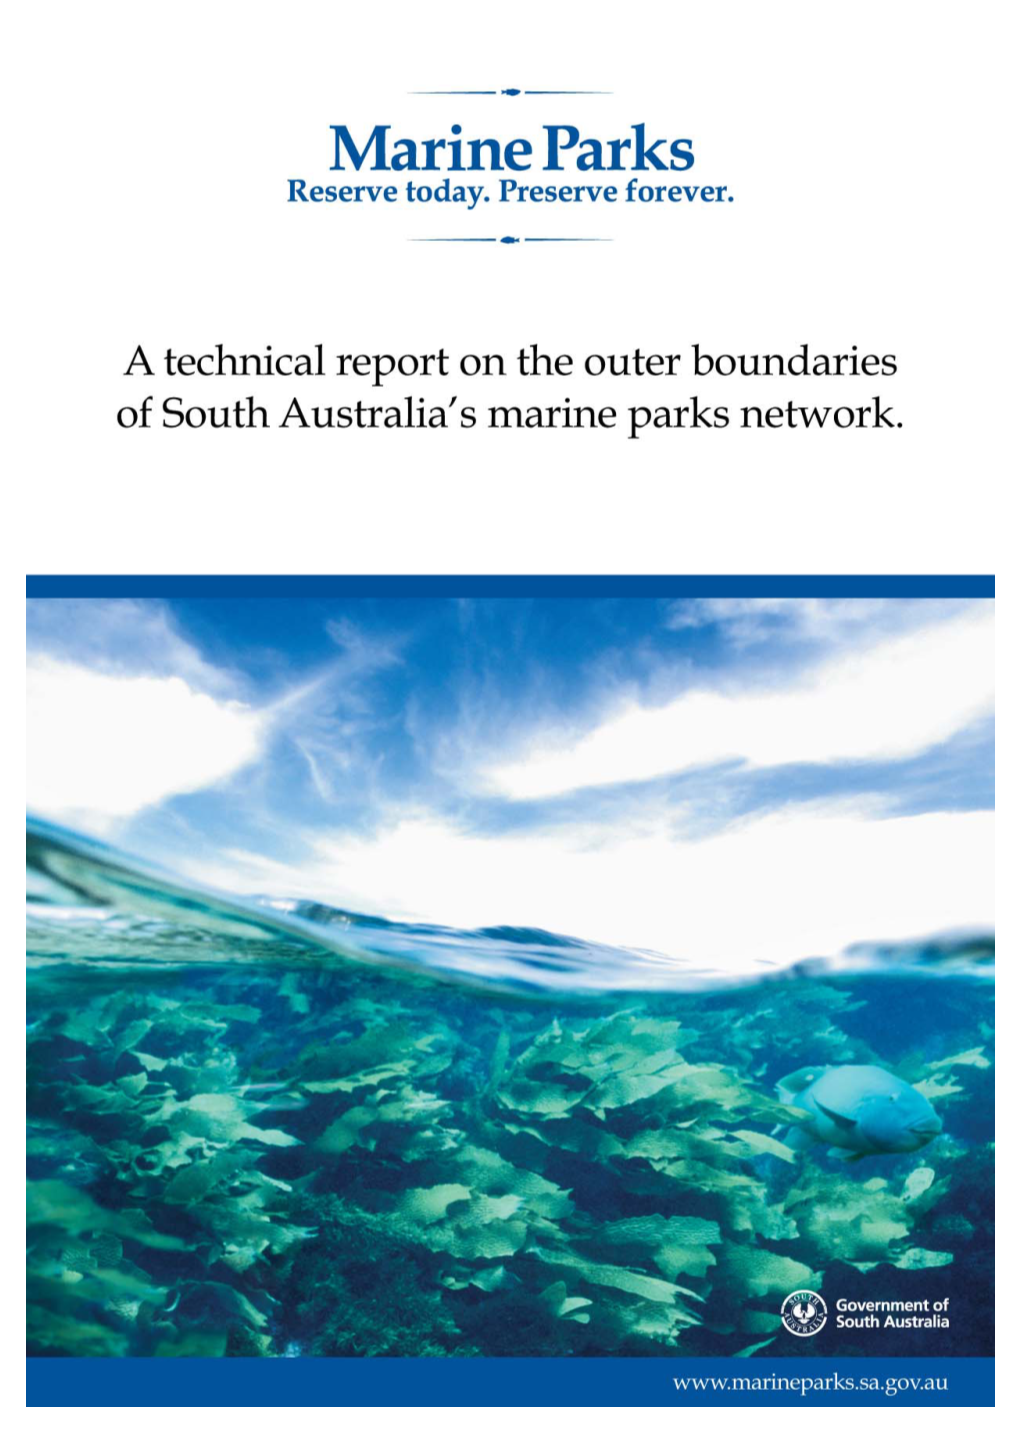 Outer Boundaries of South Australia's Marine Parks Networks